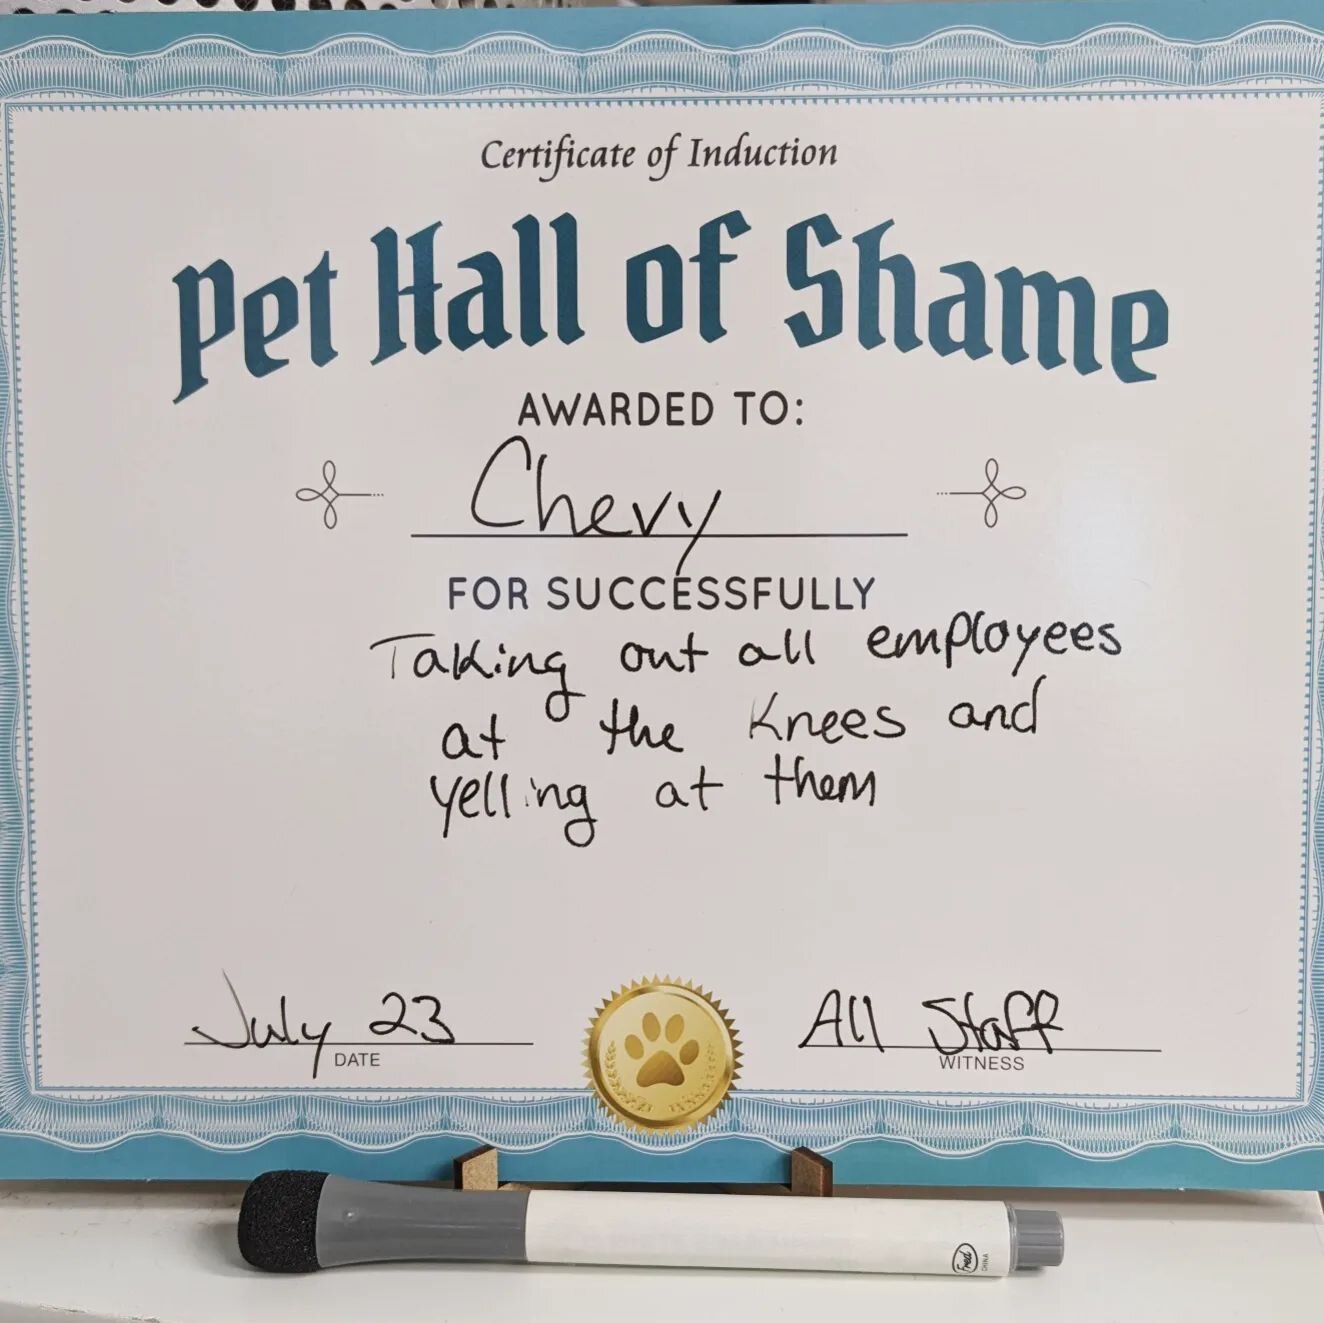 We have a new board of shame! This week Chevy got zoomies during play group and went full sprint into the back of multiple employees knees causing them to lose balance. He proceeded to then bark at them for attention as they weren't listening fast en